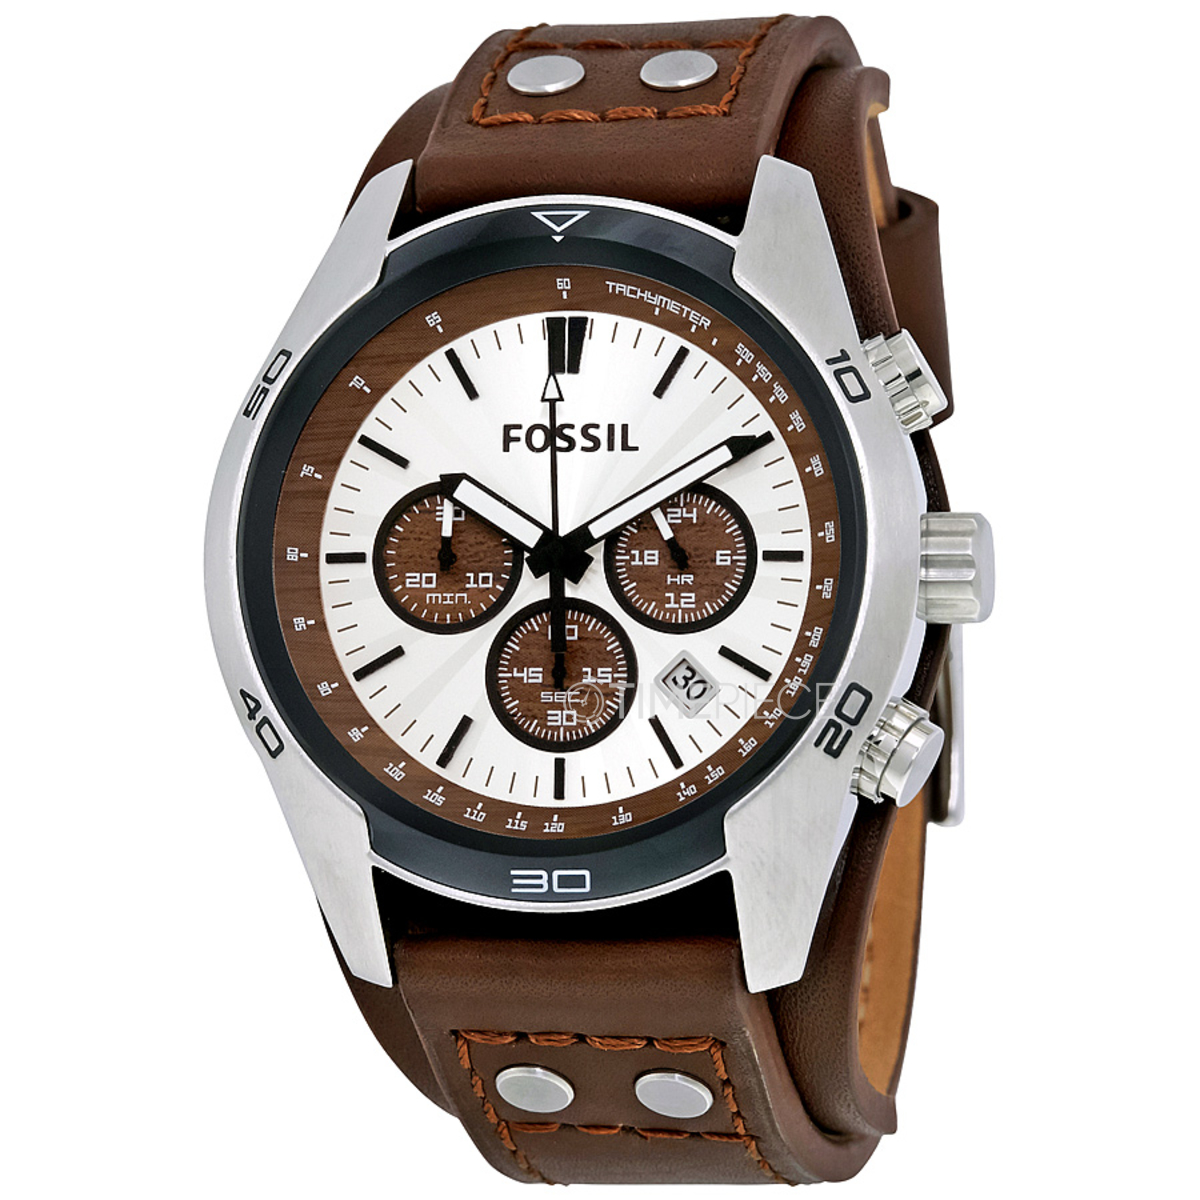 Cuff CH2565 Coachman Leather Chronograph Fossil Watch Mens